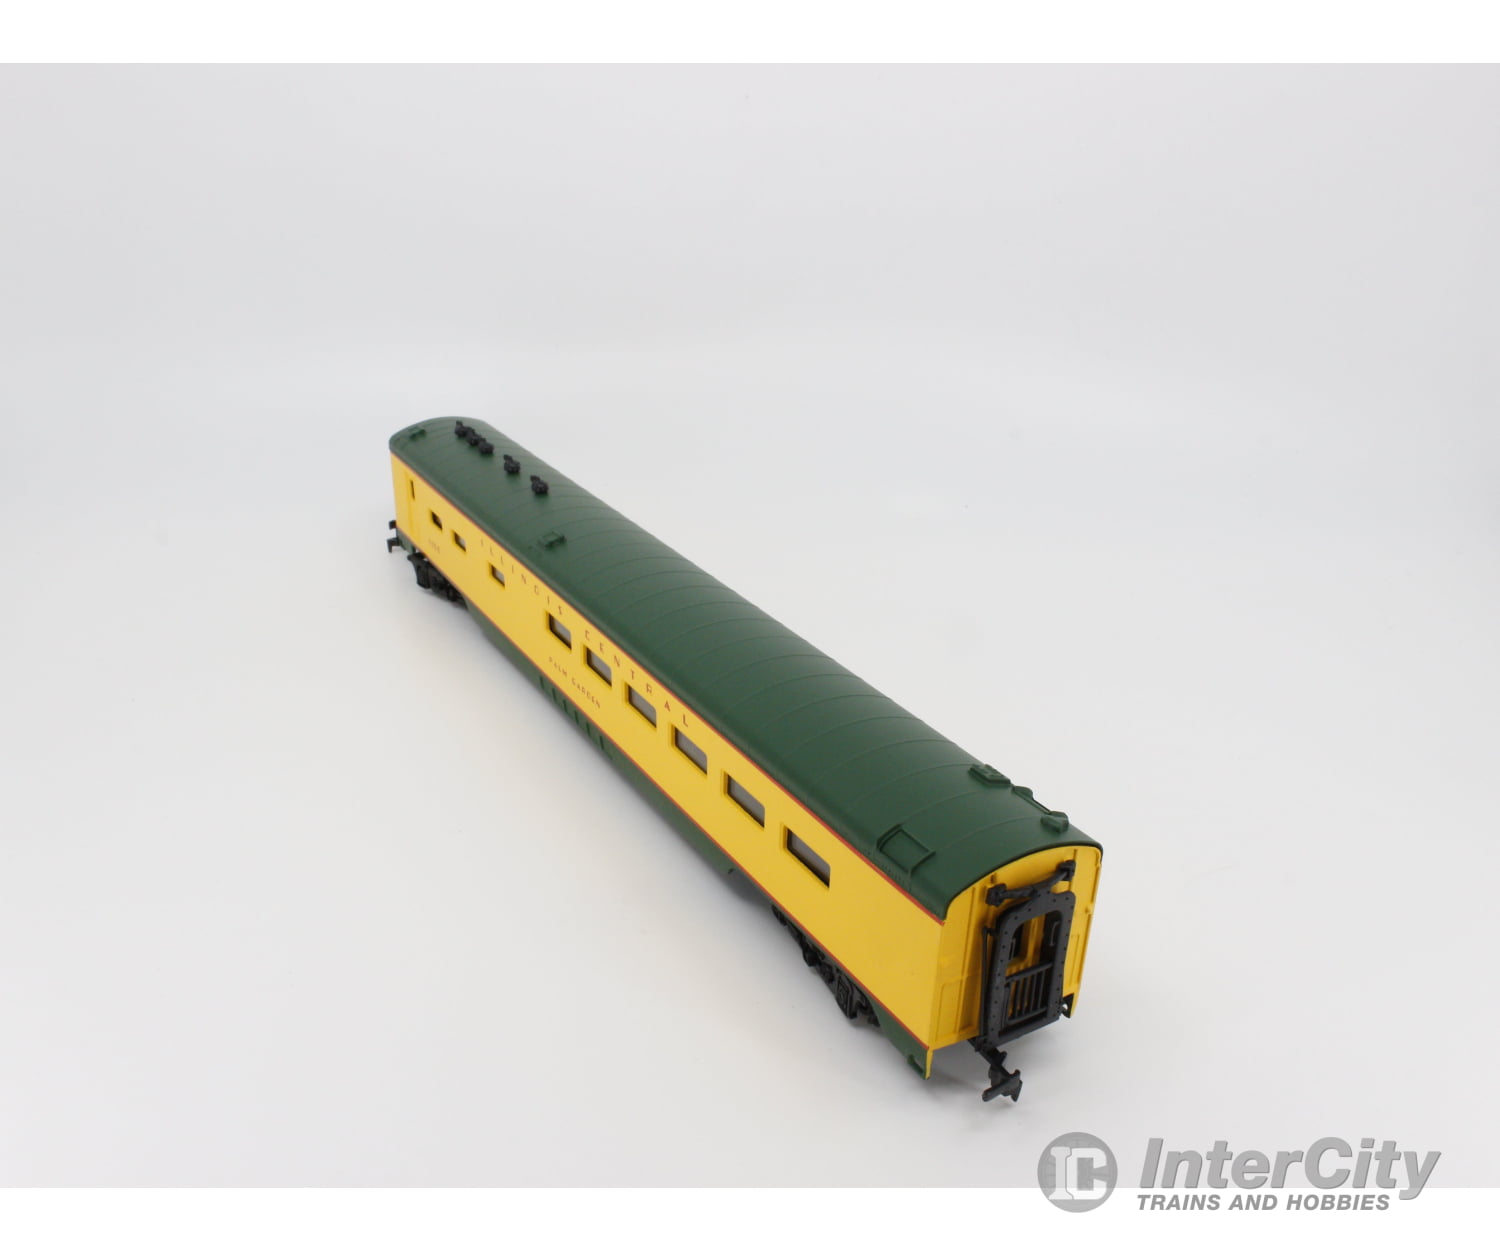 International Hobby Corp. 48332 Ho Dining Passenger Car Smooth Side P.s. Illinois Central (Ic) 4100